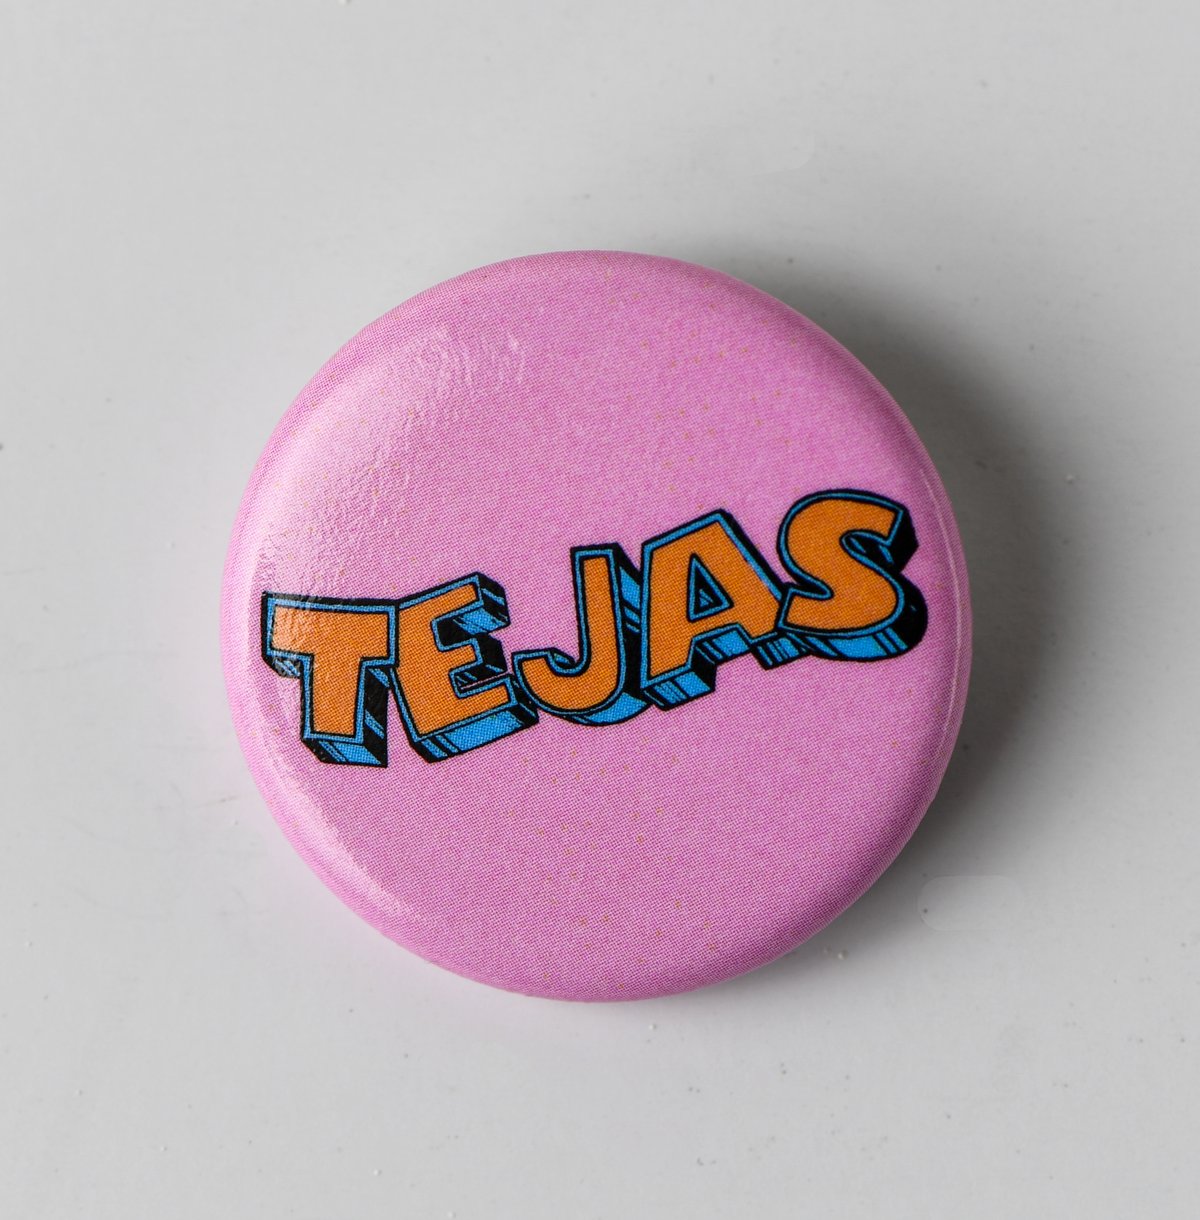 Image of Tejas button